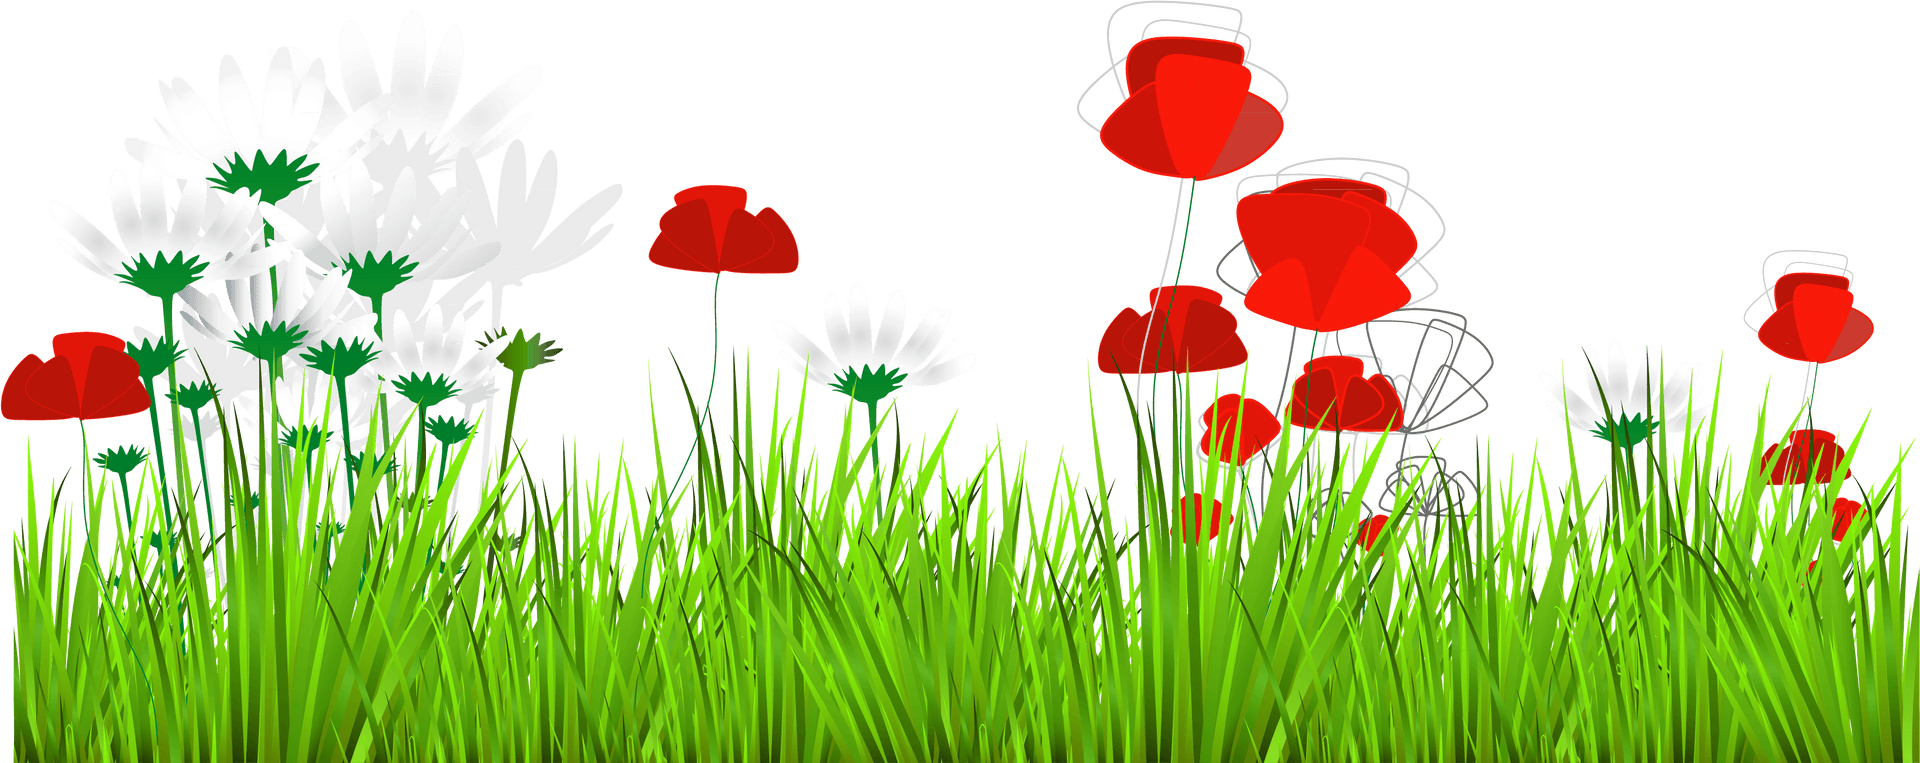 Red Poppiesand White Daisiesin Grass PNG image